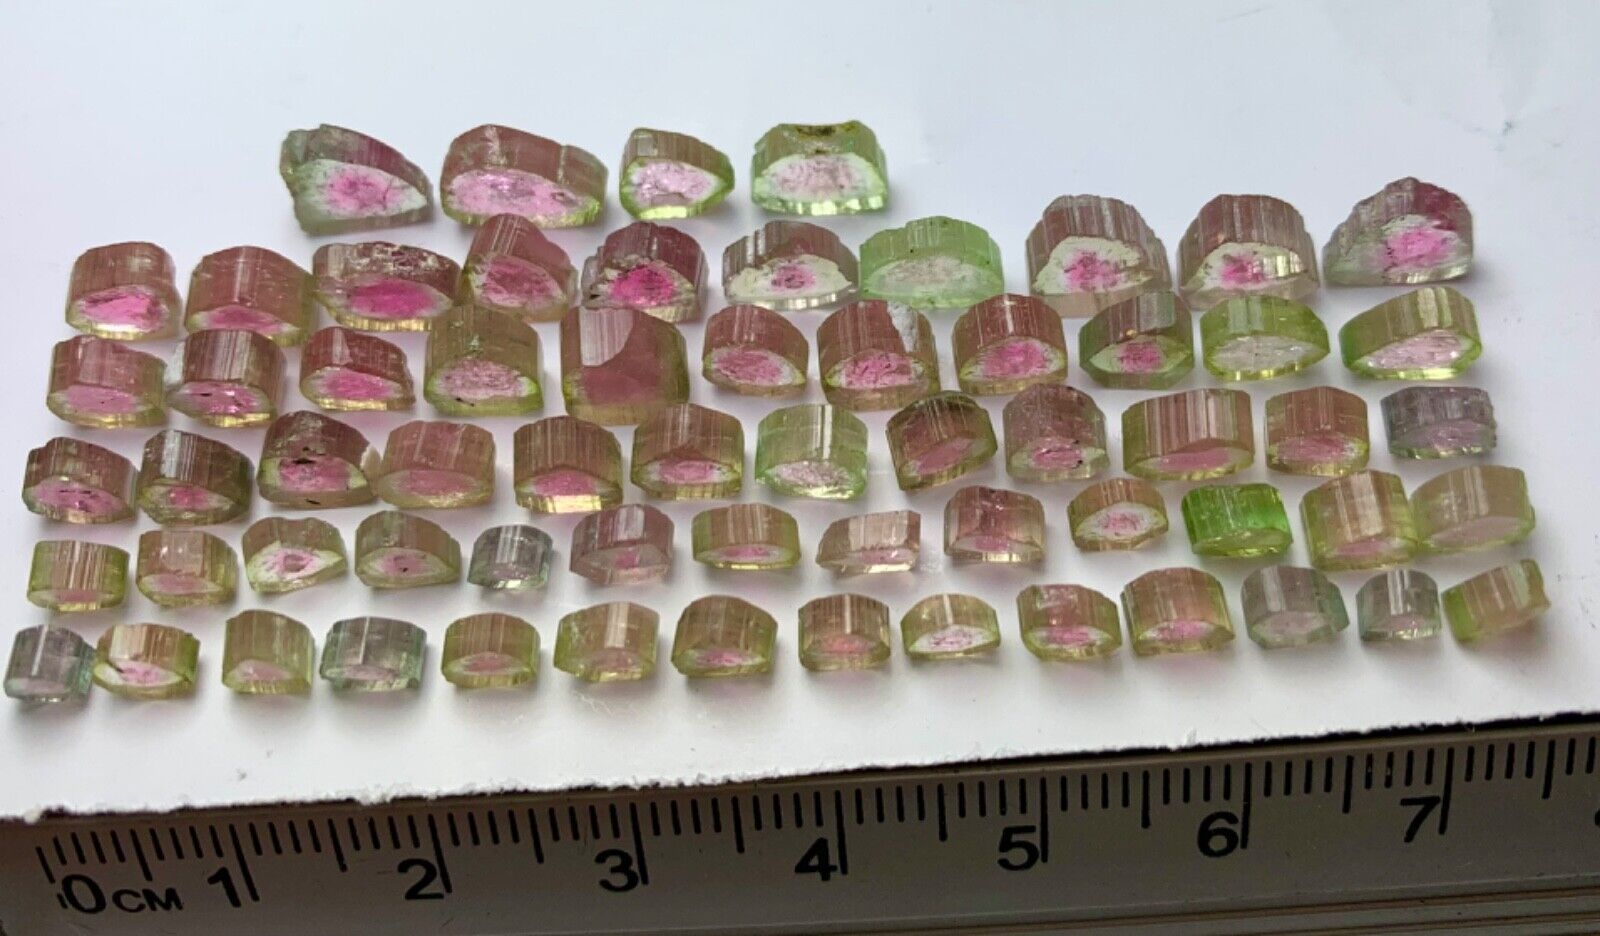 56.80 Ct Well Polished Mix Colours Tourmaline Slices Lot from Afghanistan